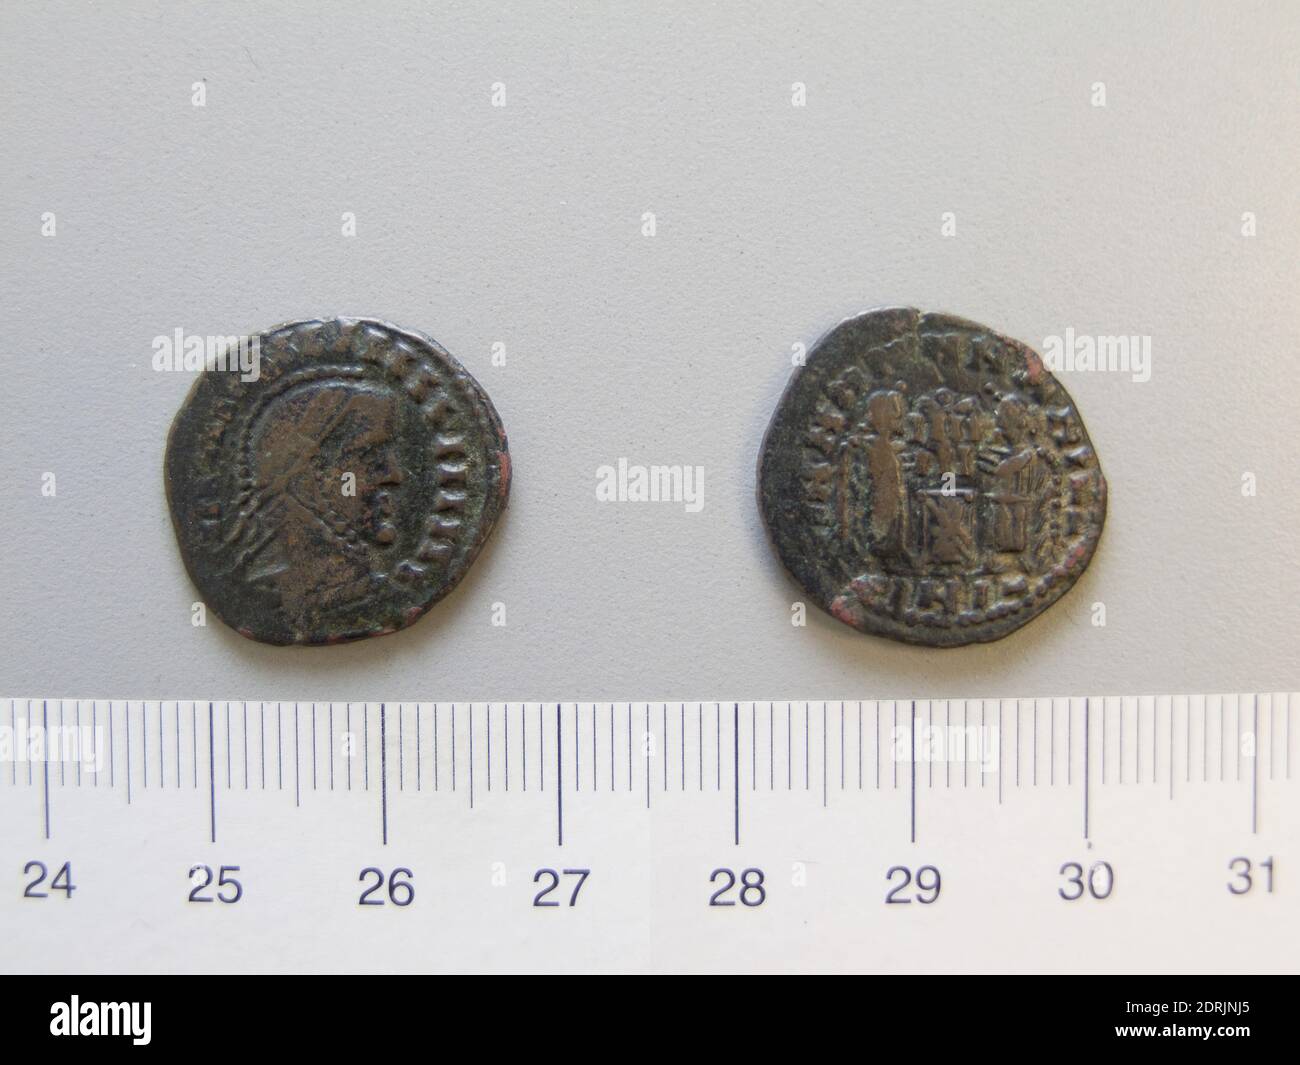 Mint: Board of Revenue, Coin dall'Inghilterra, 318–20, base, 3.00 g, 6:00, 18.5 mm, Made in England, British, IV secolo, Numismatica Foto Stock